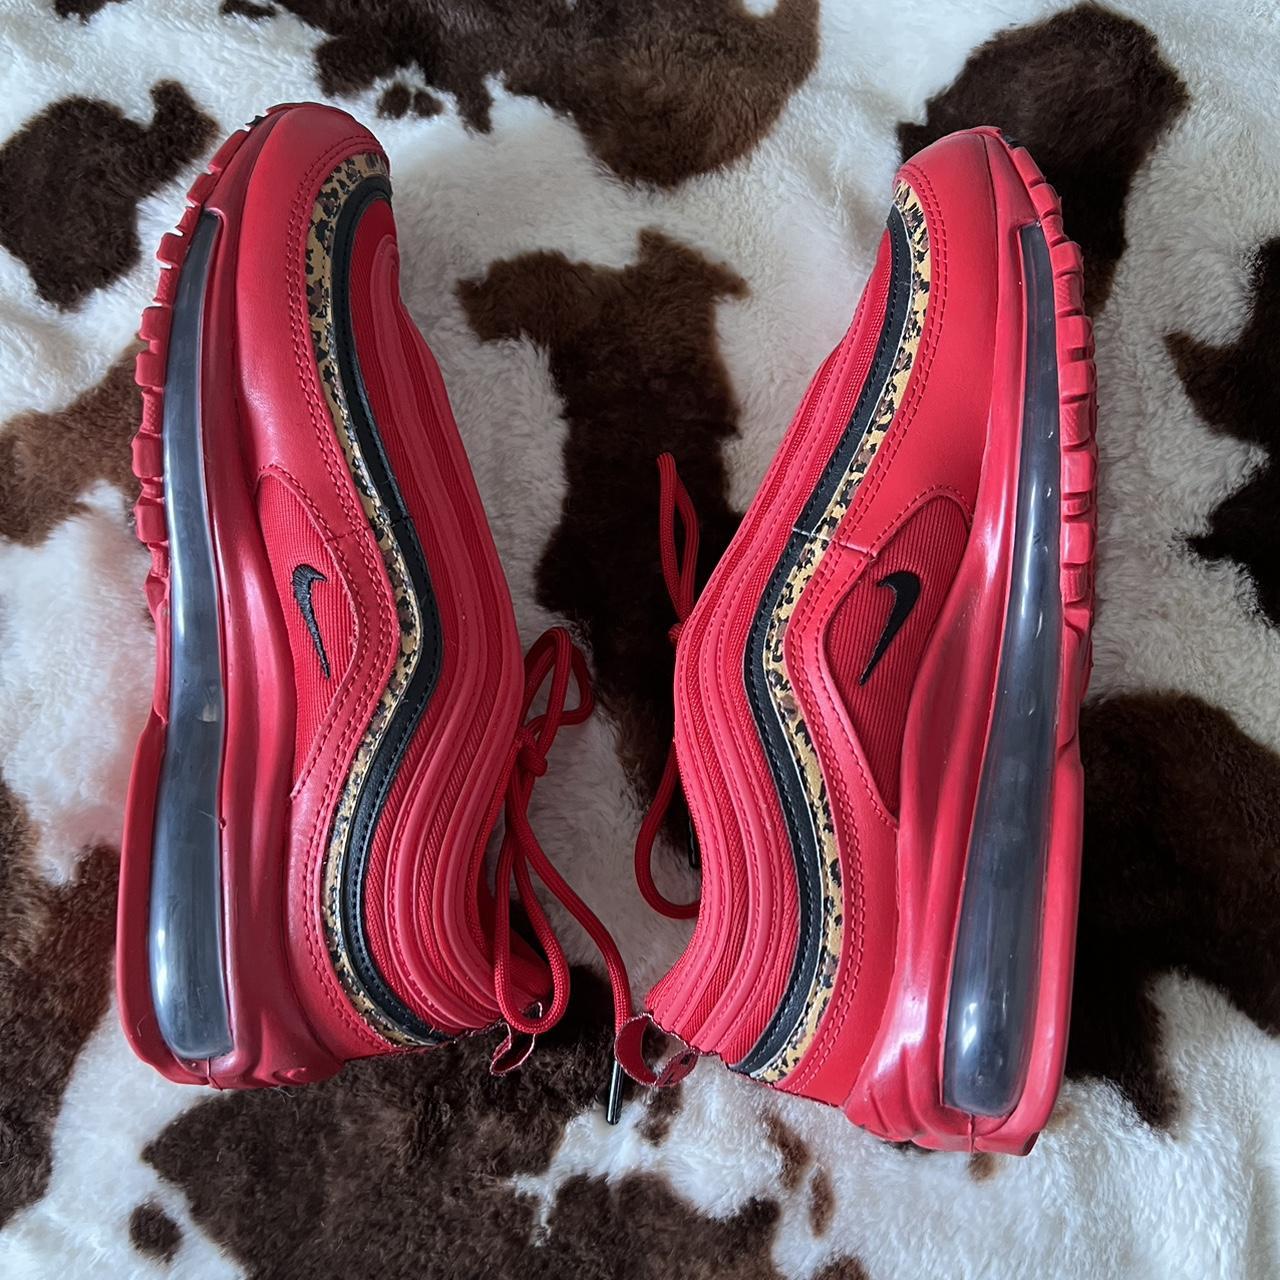 Nike Women's Red Trainers (3)